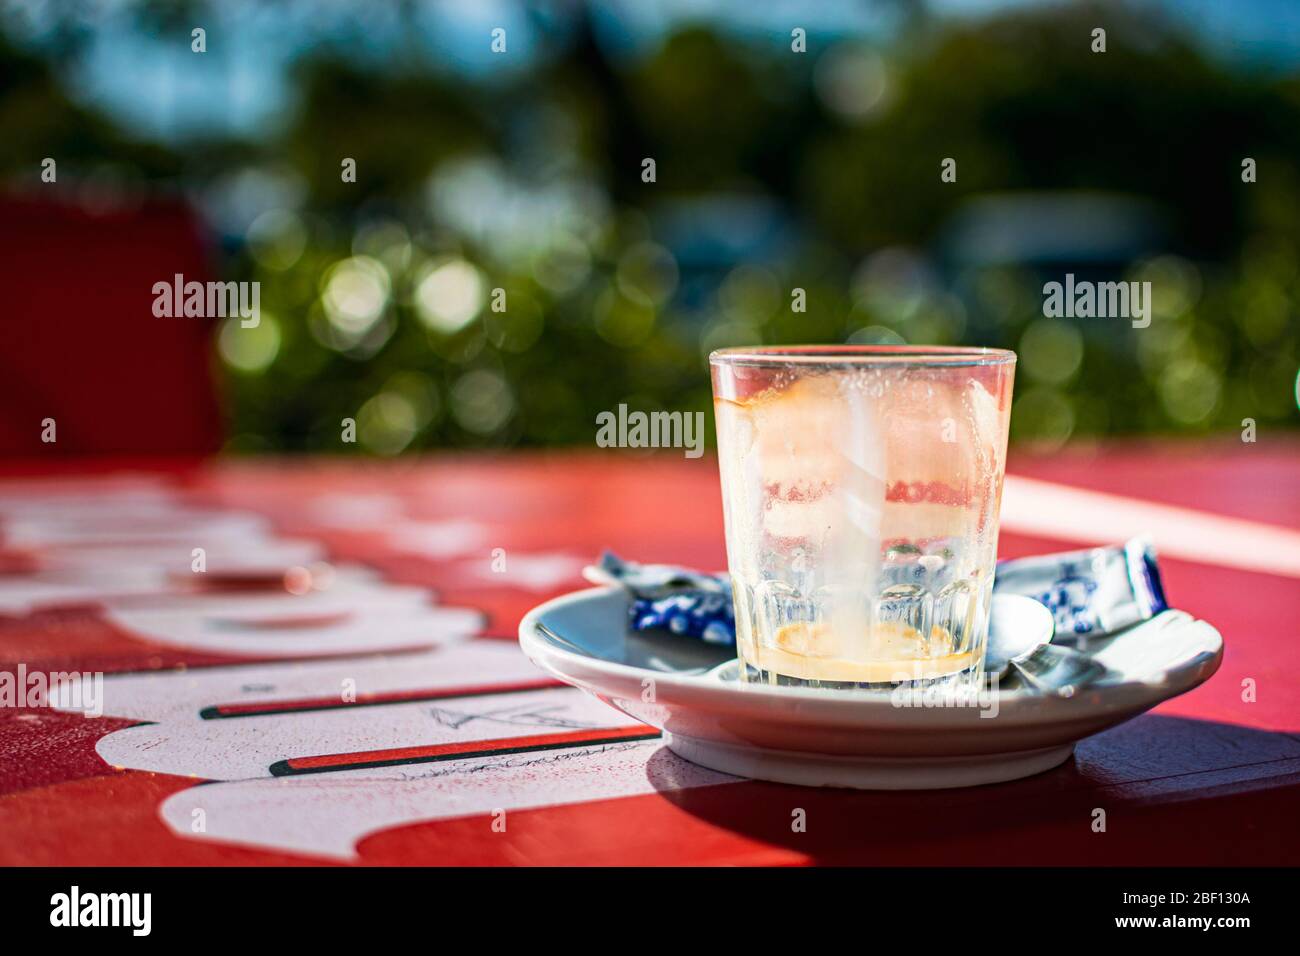 An empty glass after a 'bombon' (typical coffee drink in the region) on a red outdoor terrace table. Stock Photo